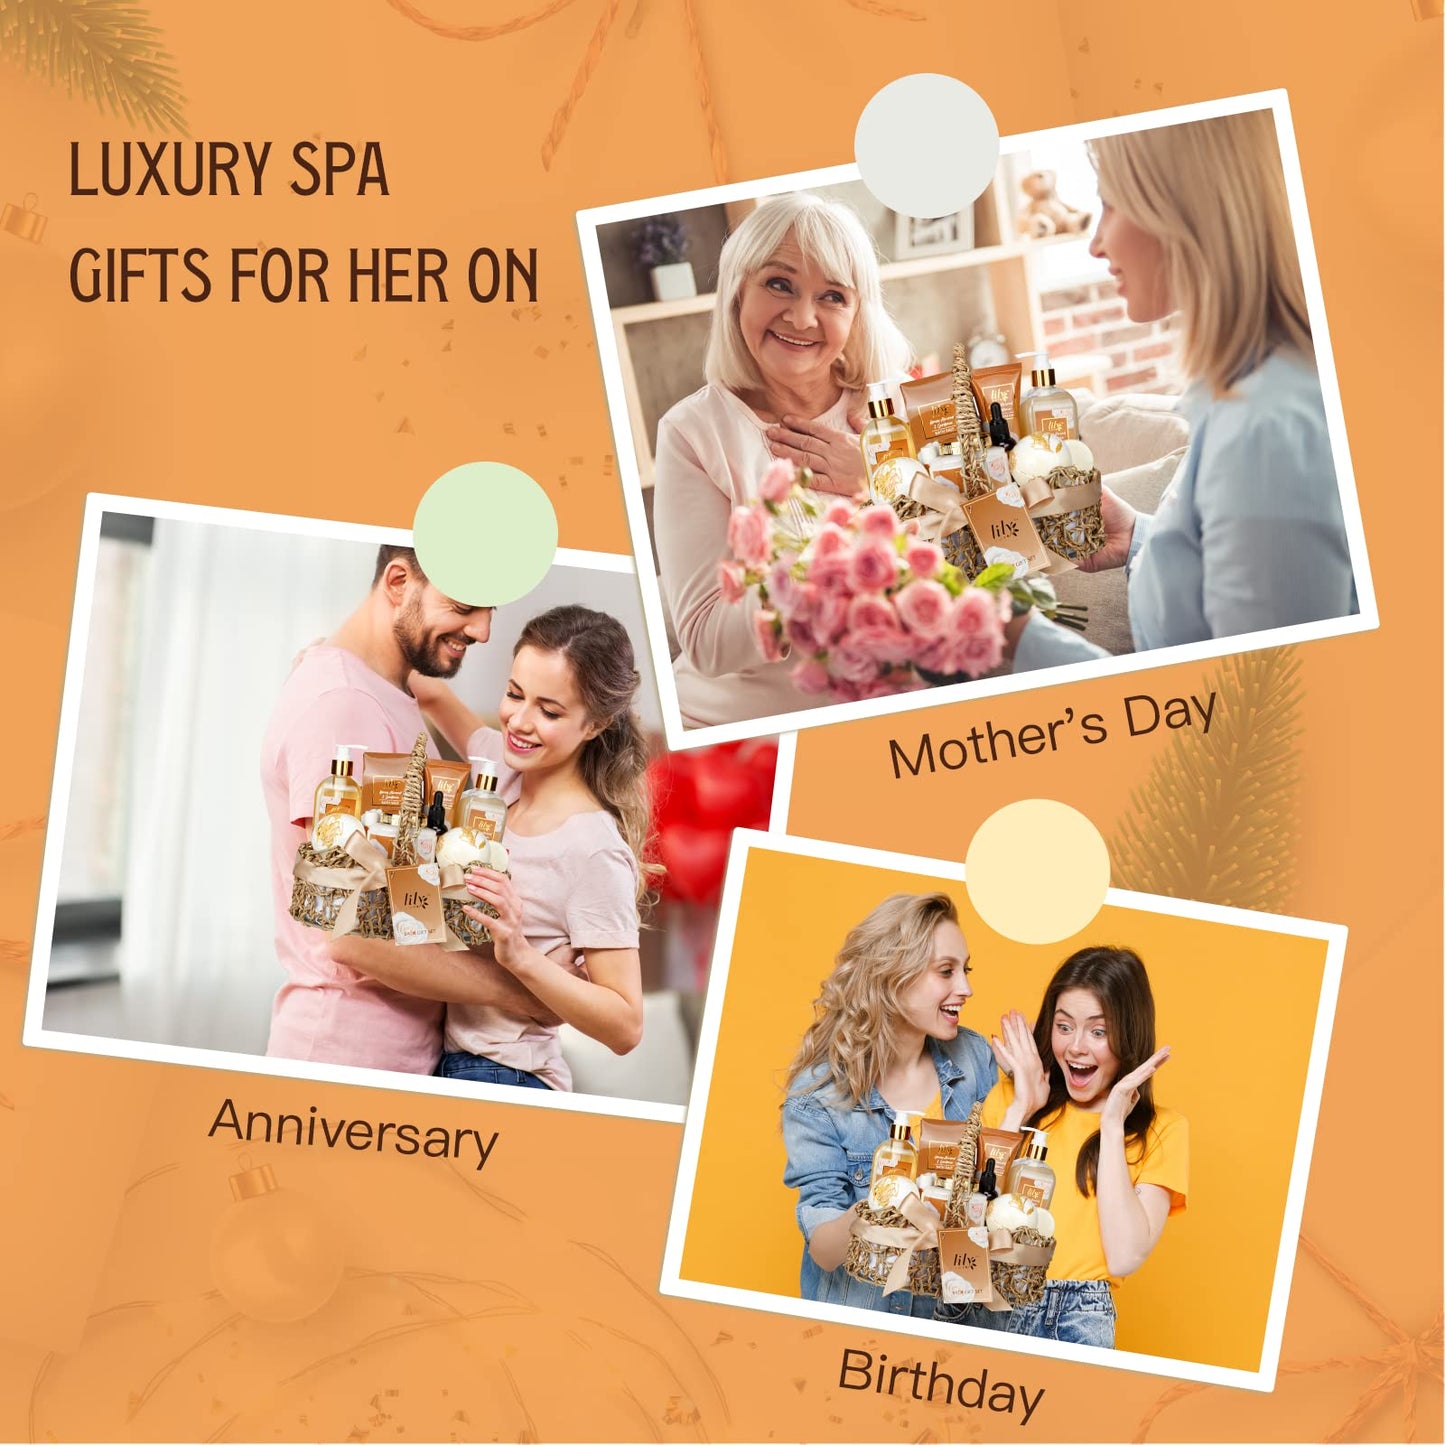 LILY ROY Mothers Day Spa Gift Baskets Set for Women 12pcs Honey Almond Bath and Body Perfume Spa Kit for Christmas Birthday Gifts for Women Works Self Skin Care Gifts Set Bath Spa Gift Set